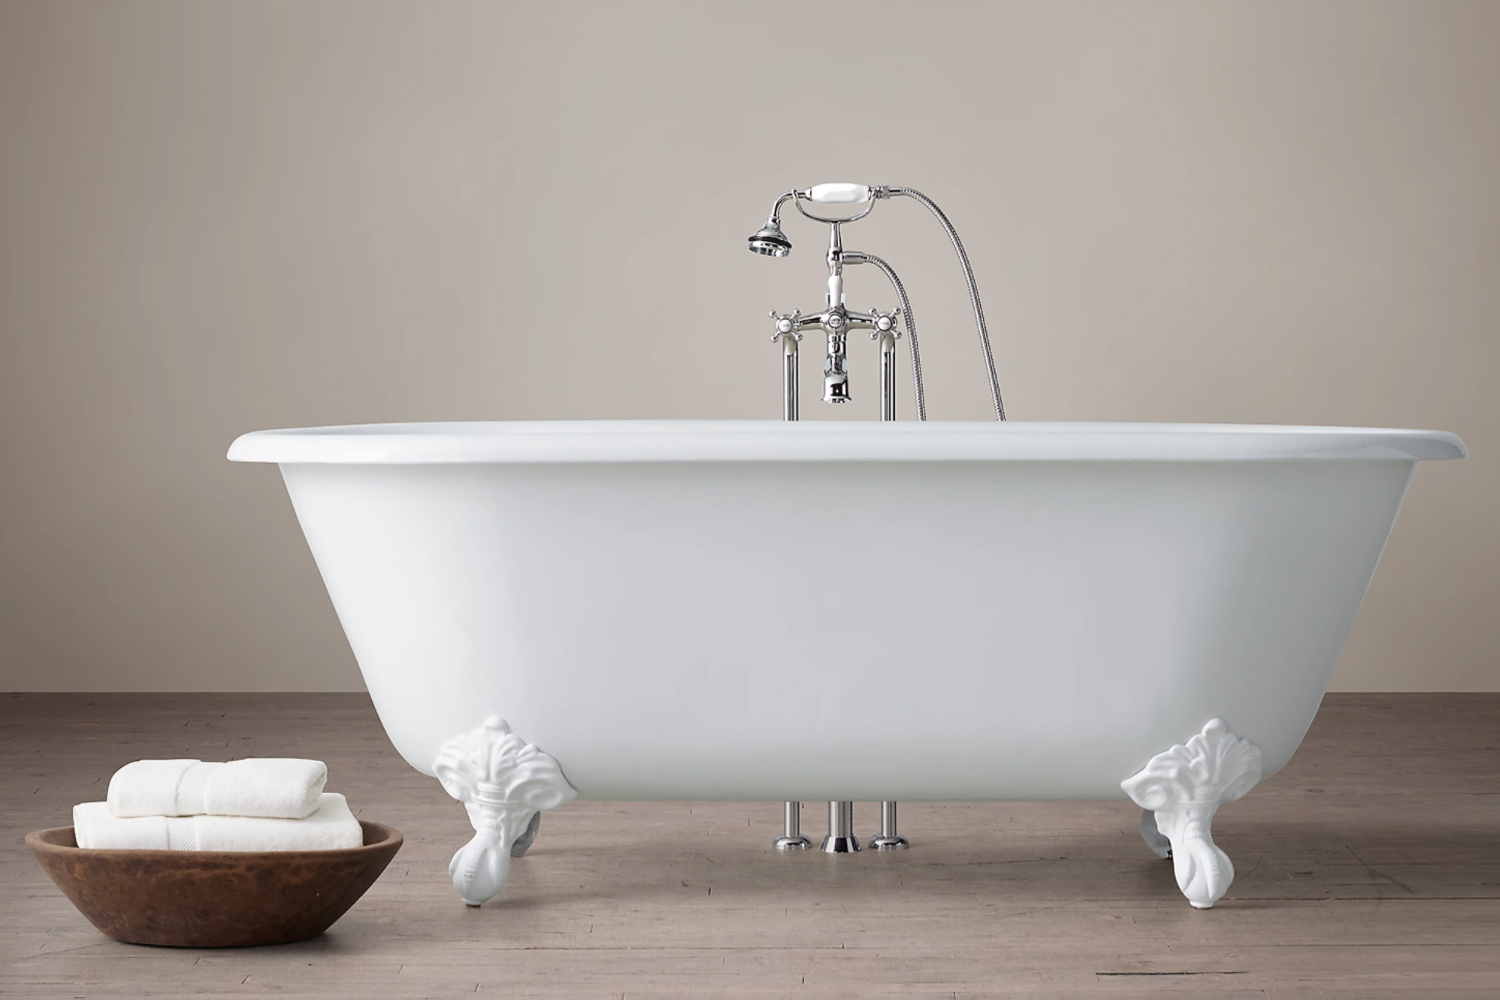 at restoration hardware, the vintage imperial clawfoot tub starts at $8,550. 11